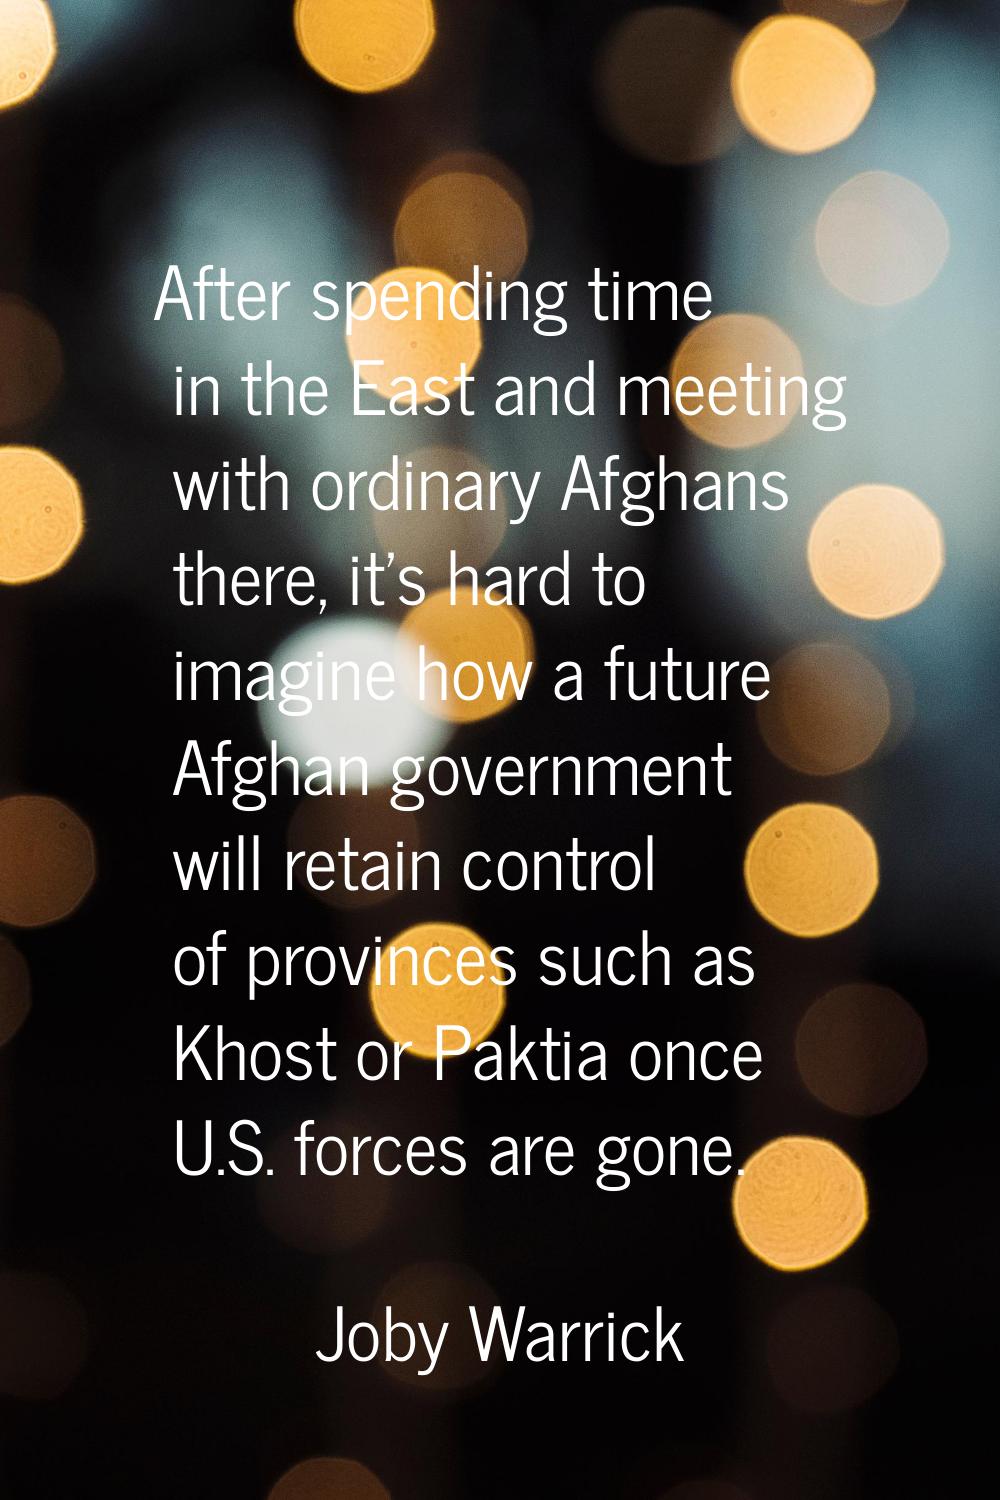 After spending time in the East and meeting with ordinary Afghans there, it's hard to imagine how a